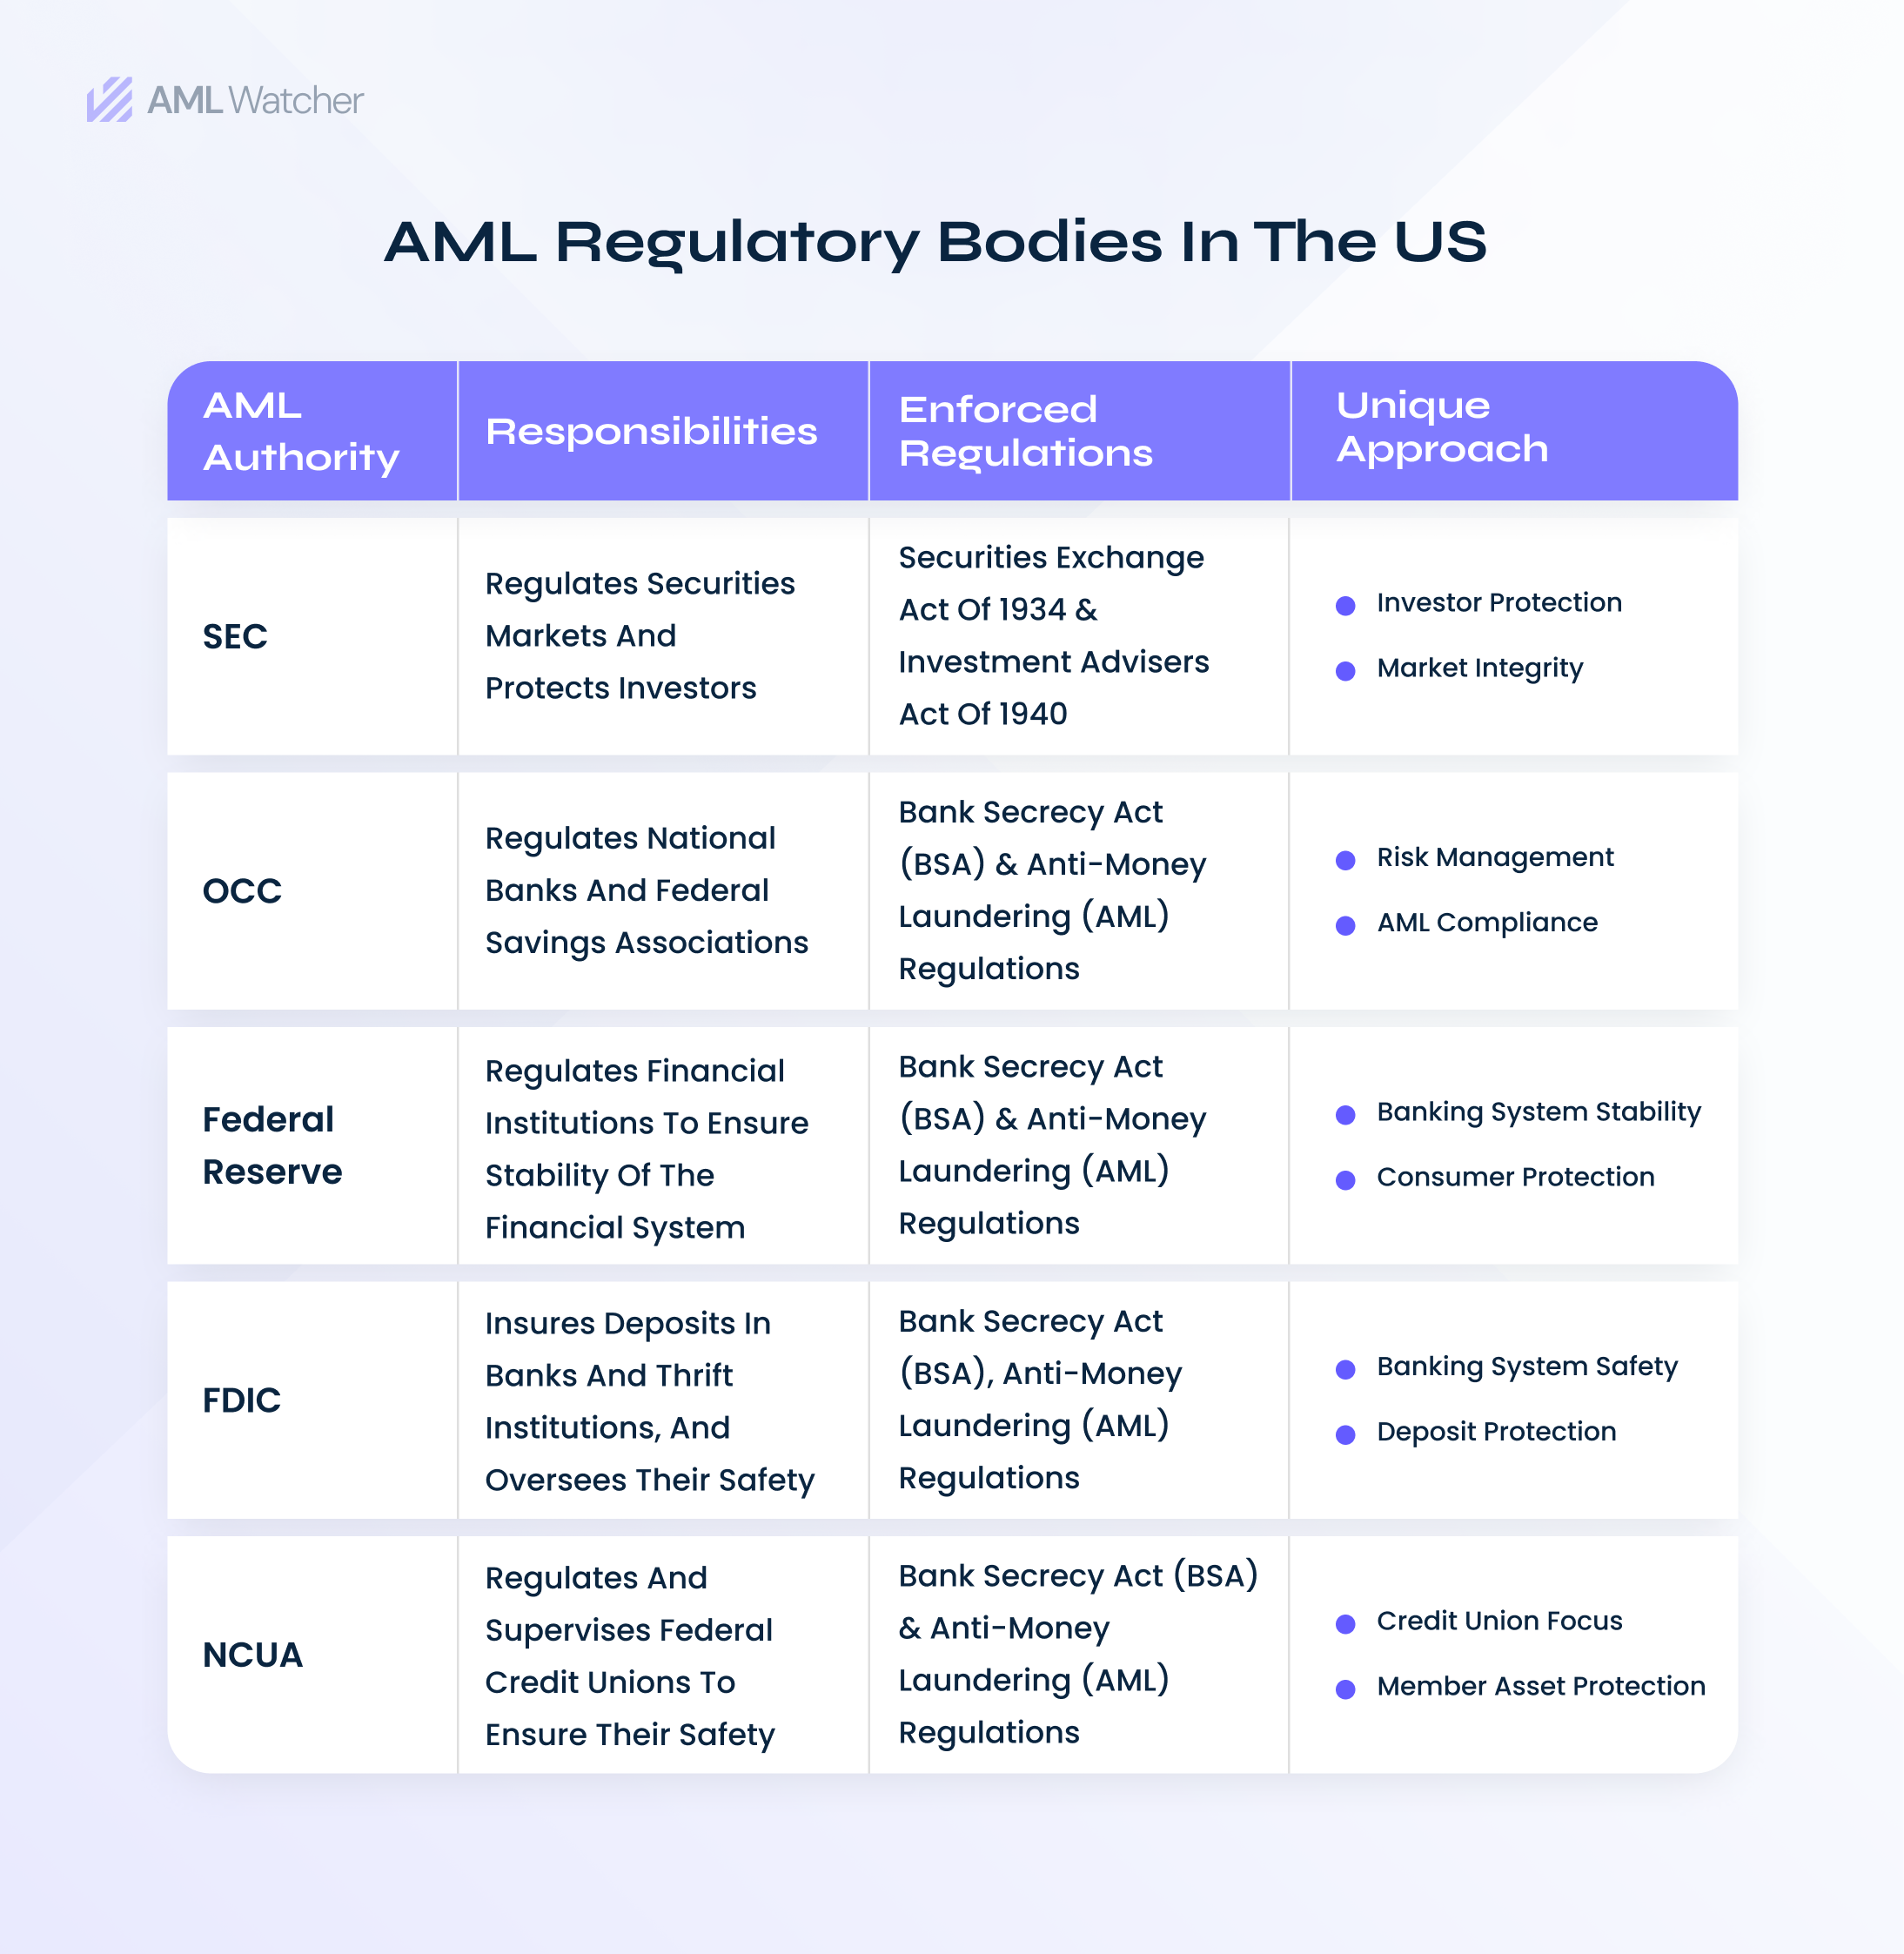 Featured image shows effective regulatory bodies in the US and their regulatory responsibilities and uniqueness.